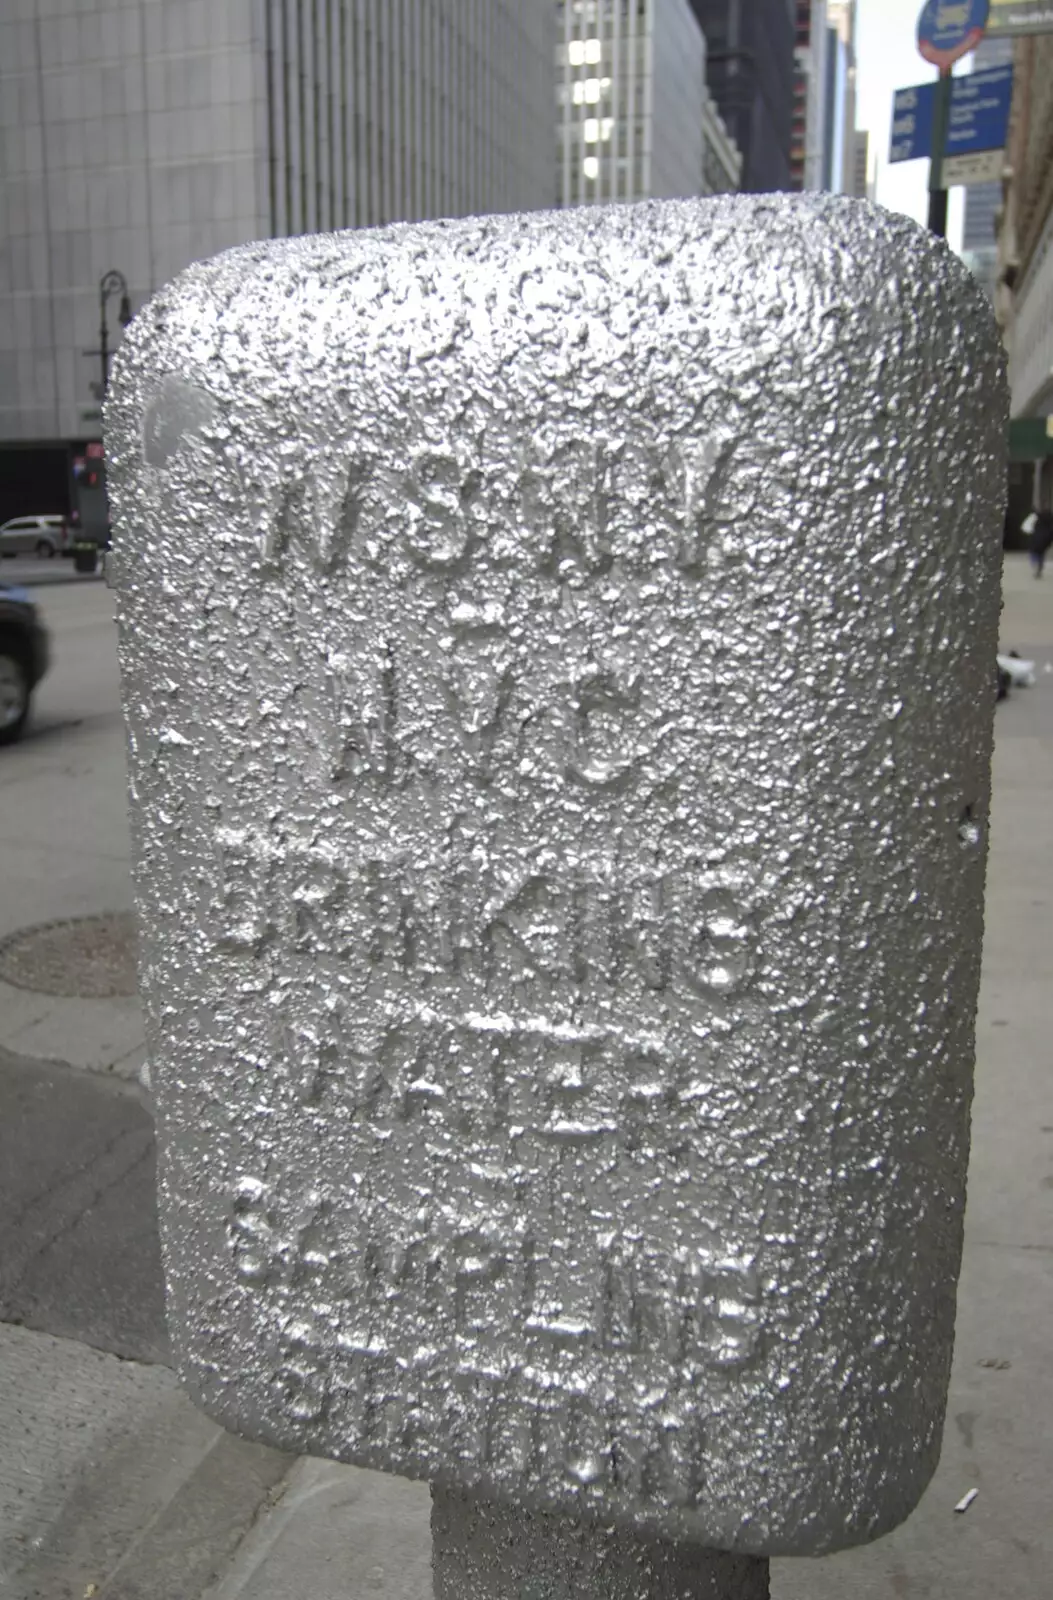 A silver drinking water sample point, from Persian Day Parade, Upper East Side and Midtown, New York, US - 25th March 2007